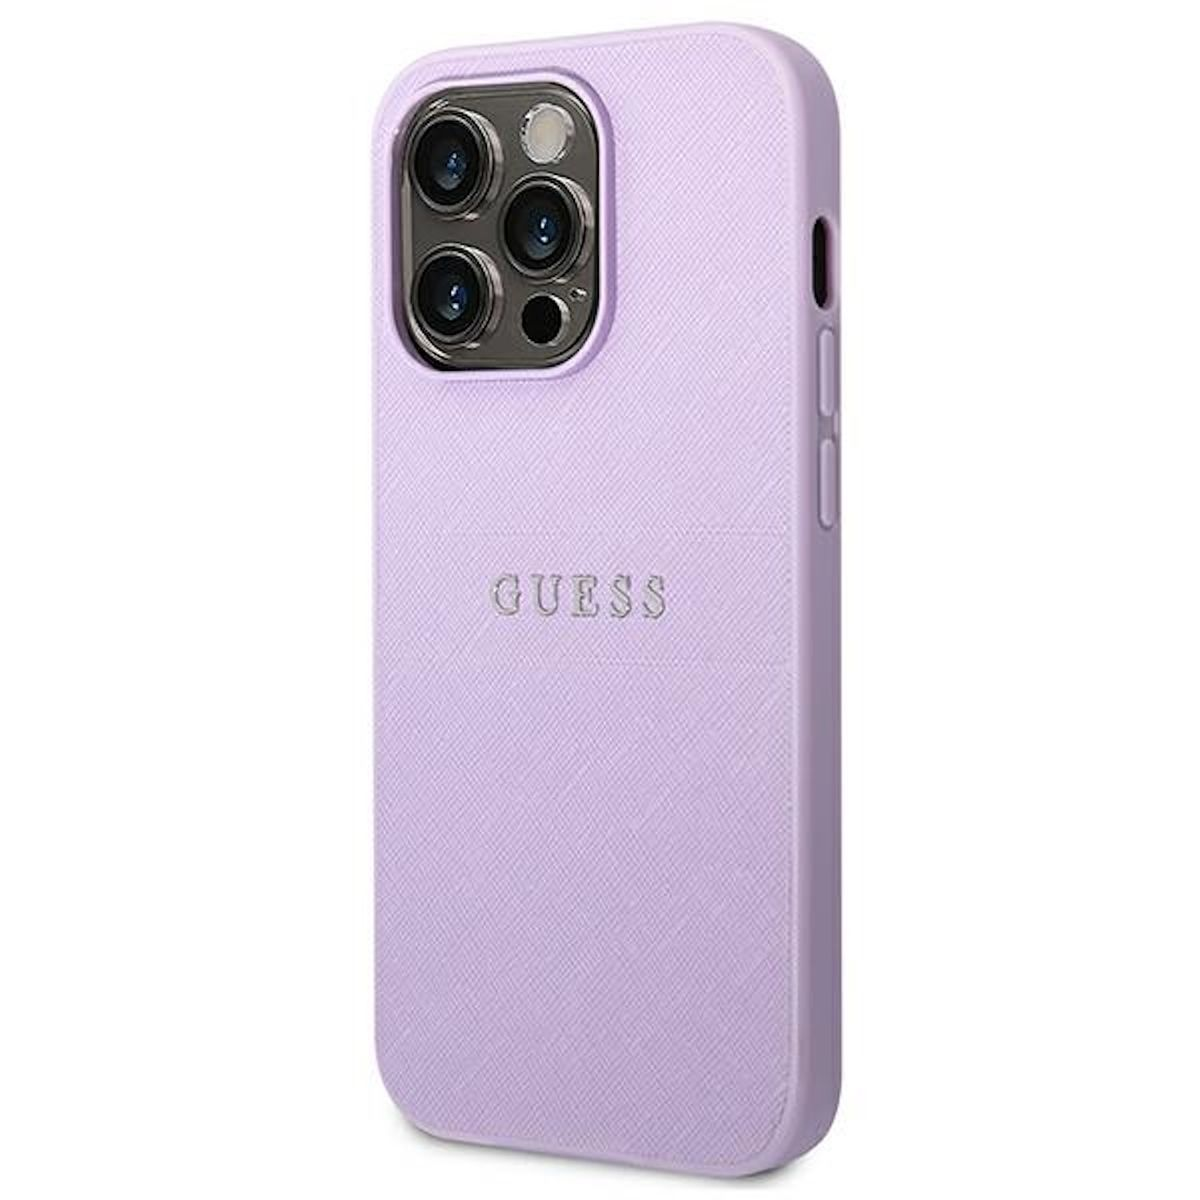 GUESS Saffiano Strap Collection Multicolor Full Cover, Hard iPhone 14 Hülle, Apple, Pro Max, Case